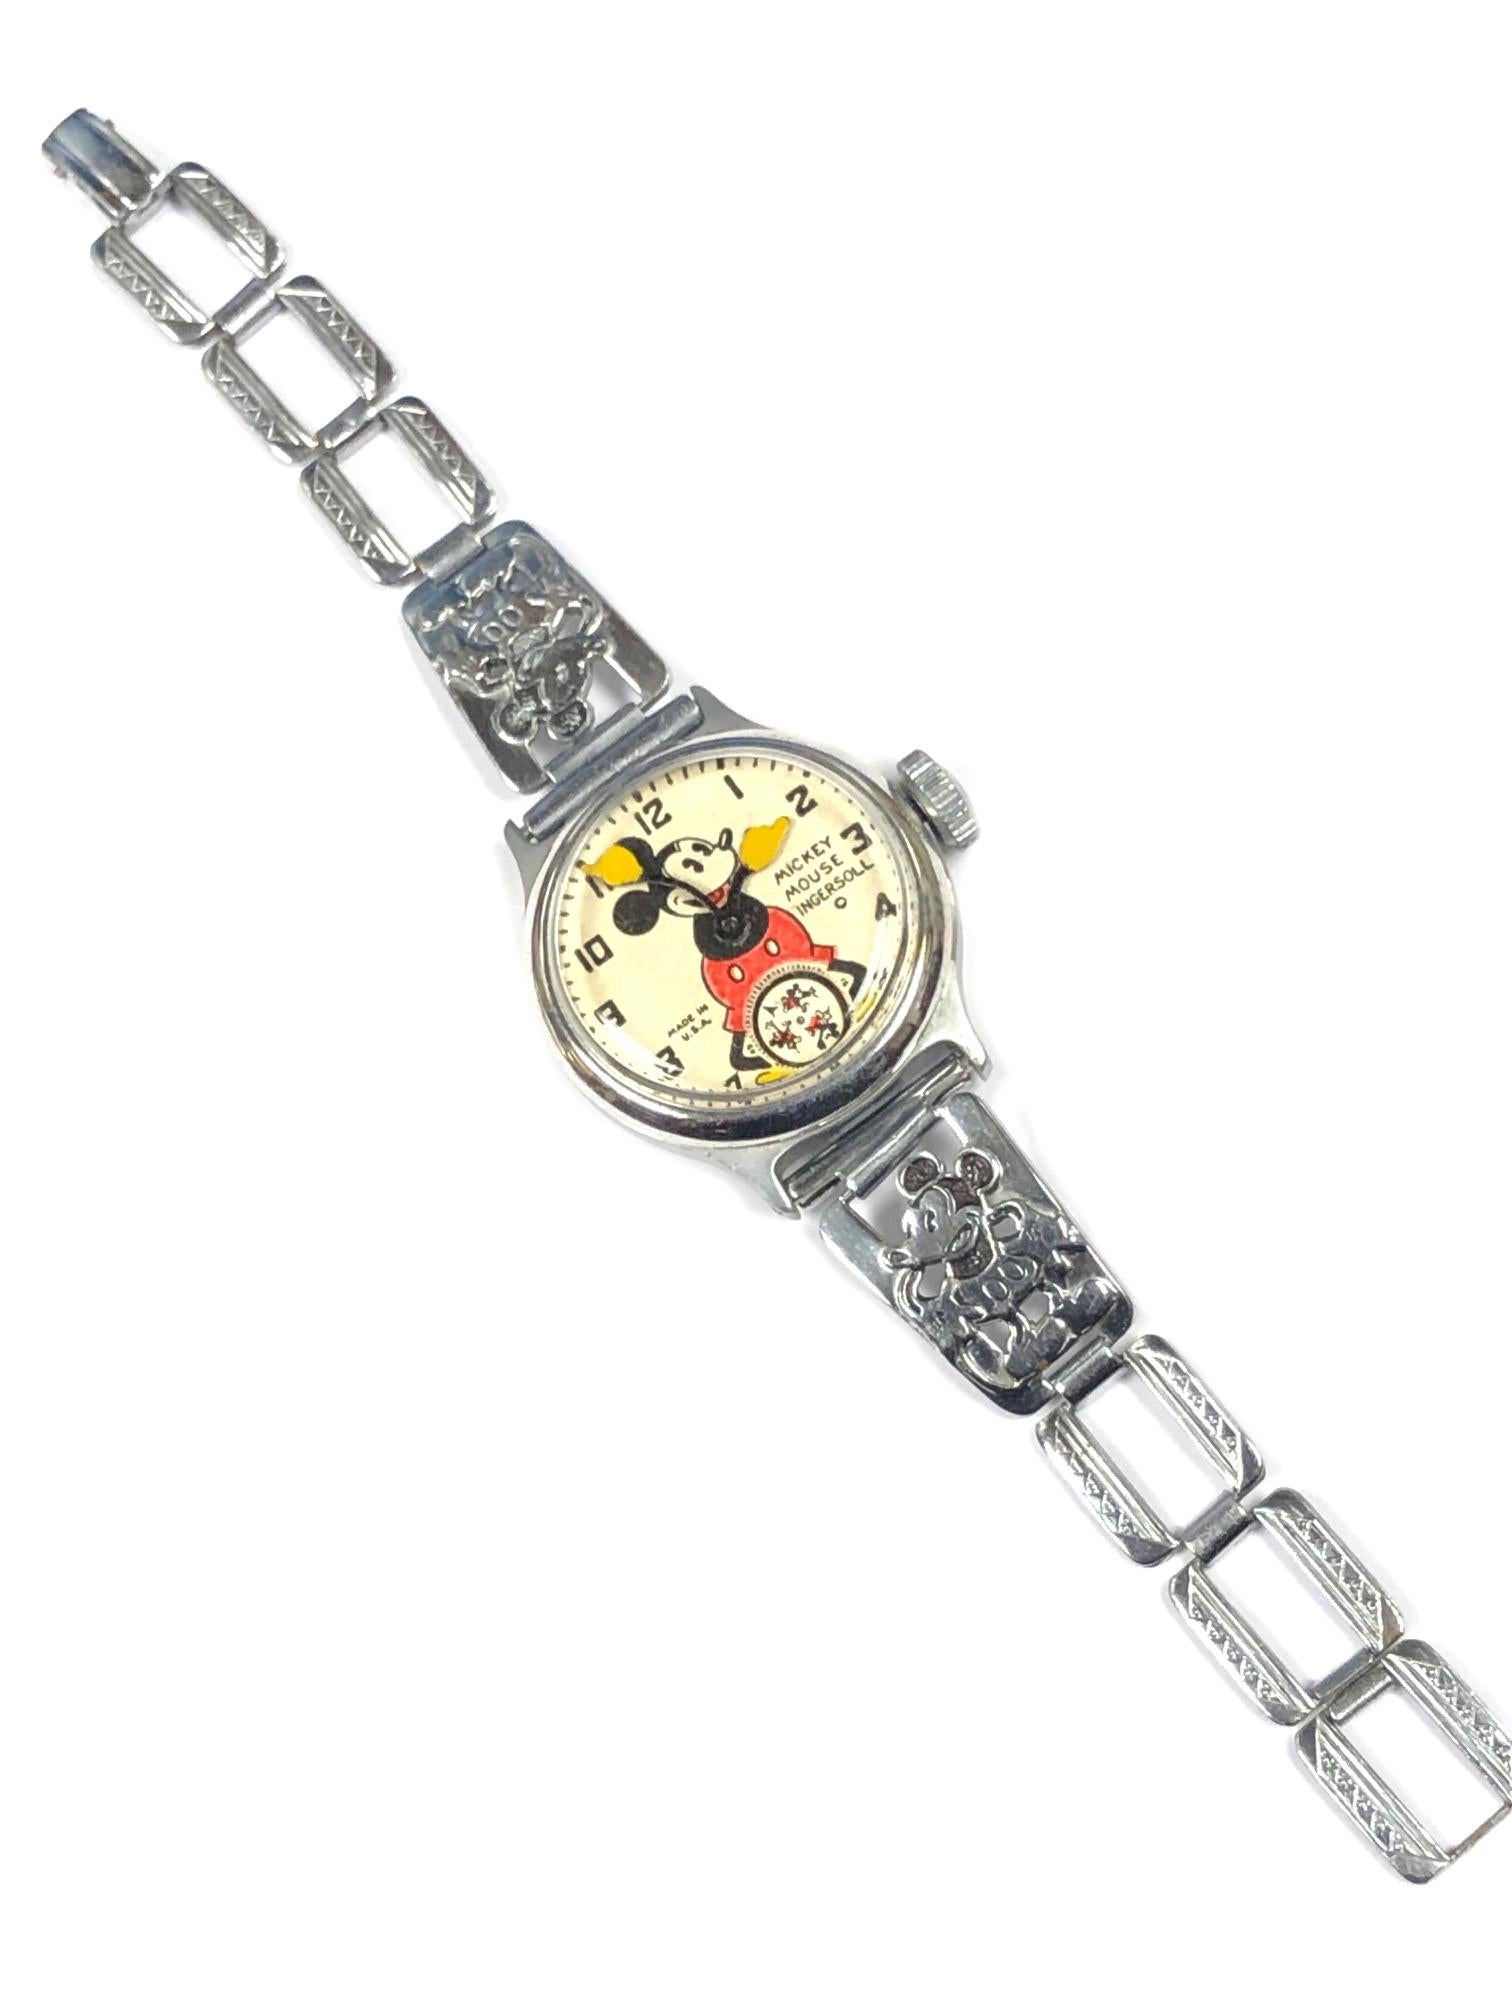 ingersoll mickey mouse watch vintage